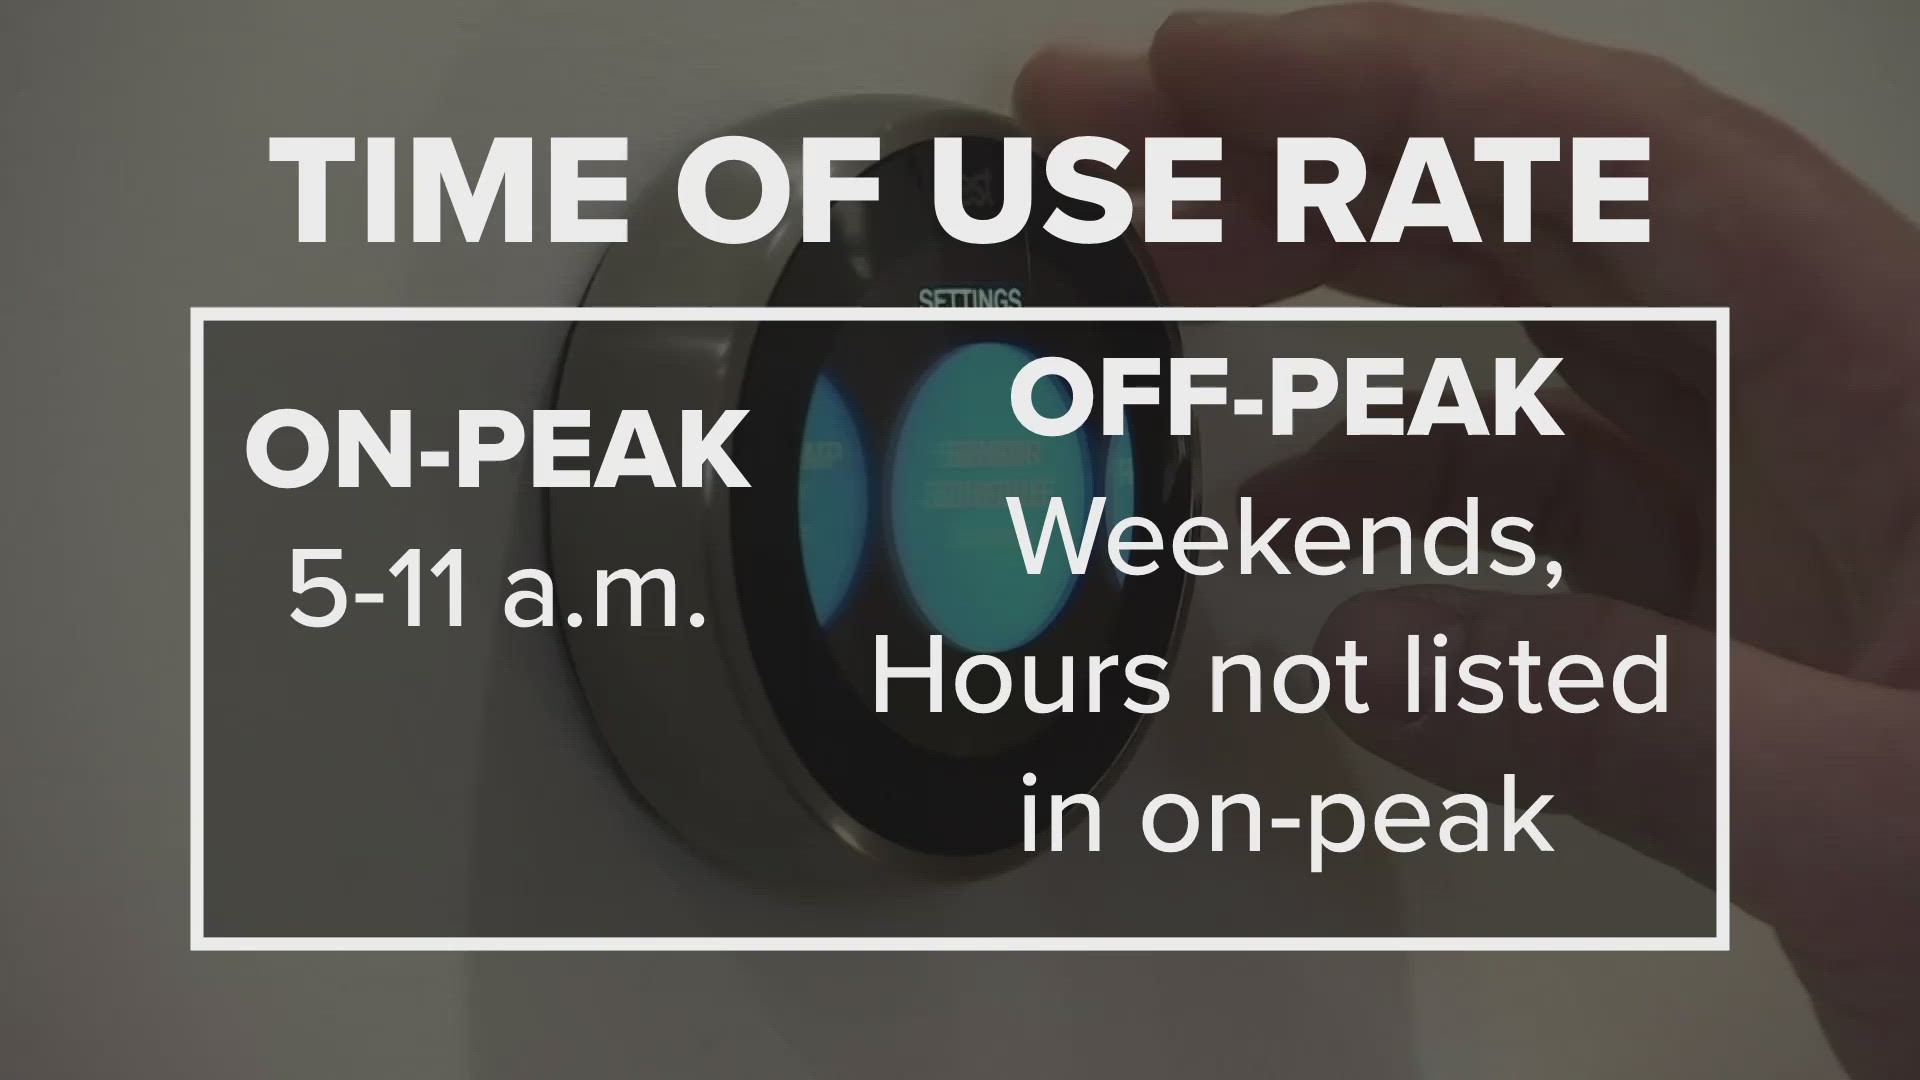 Energy used during peak hours, between 5am and 11am during the winter, has a higher rate. 
Energy used during off-peak hours costs you less.